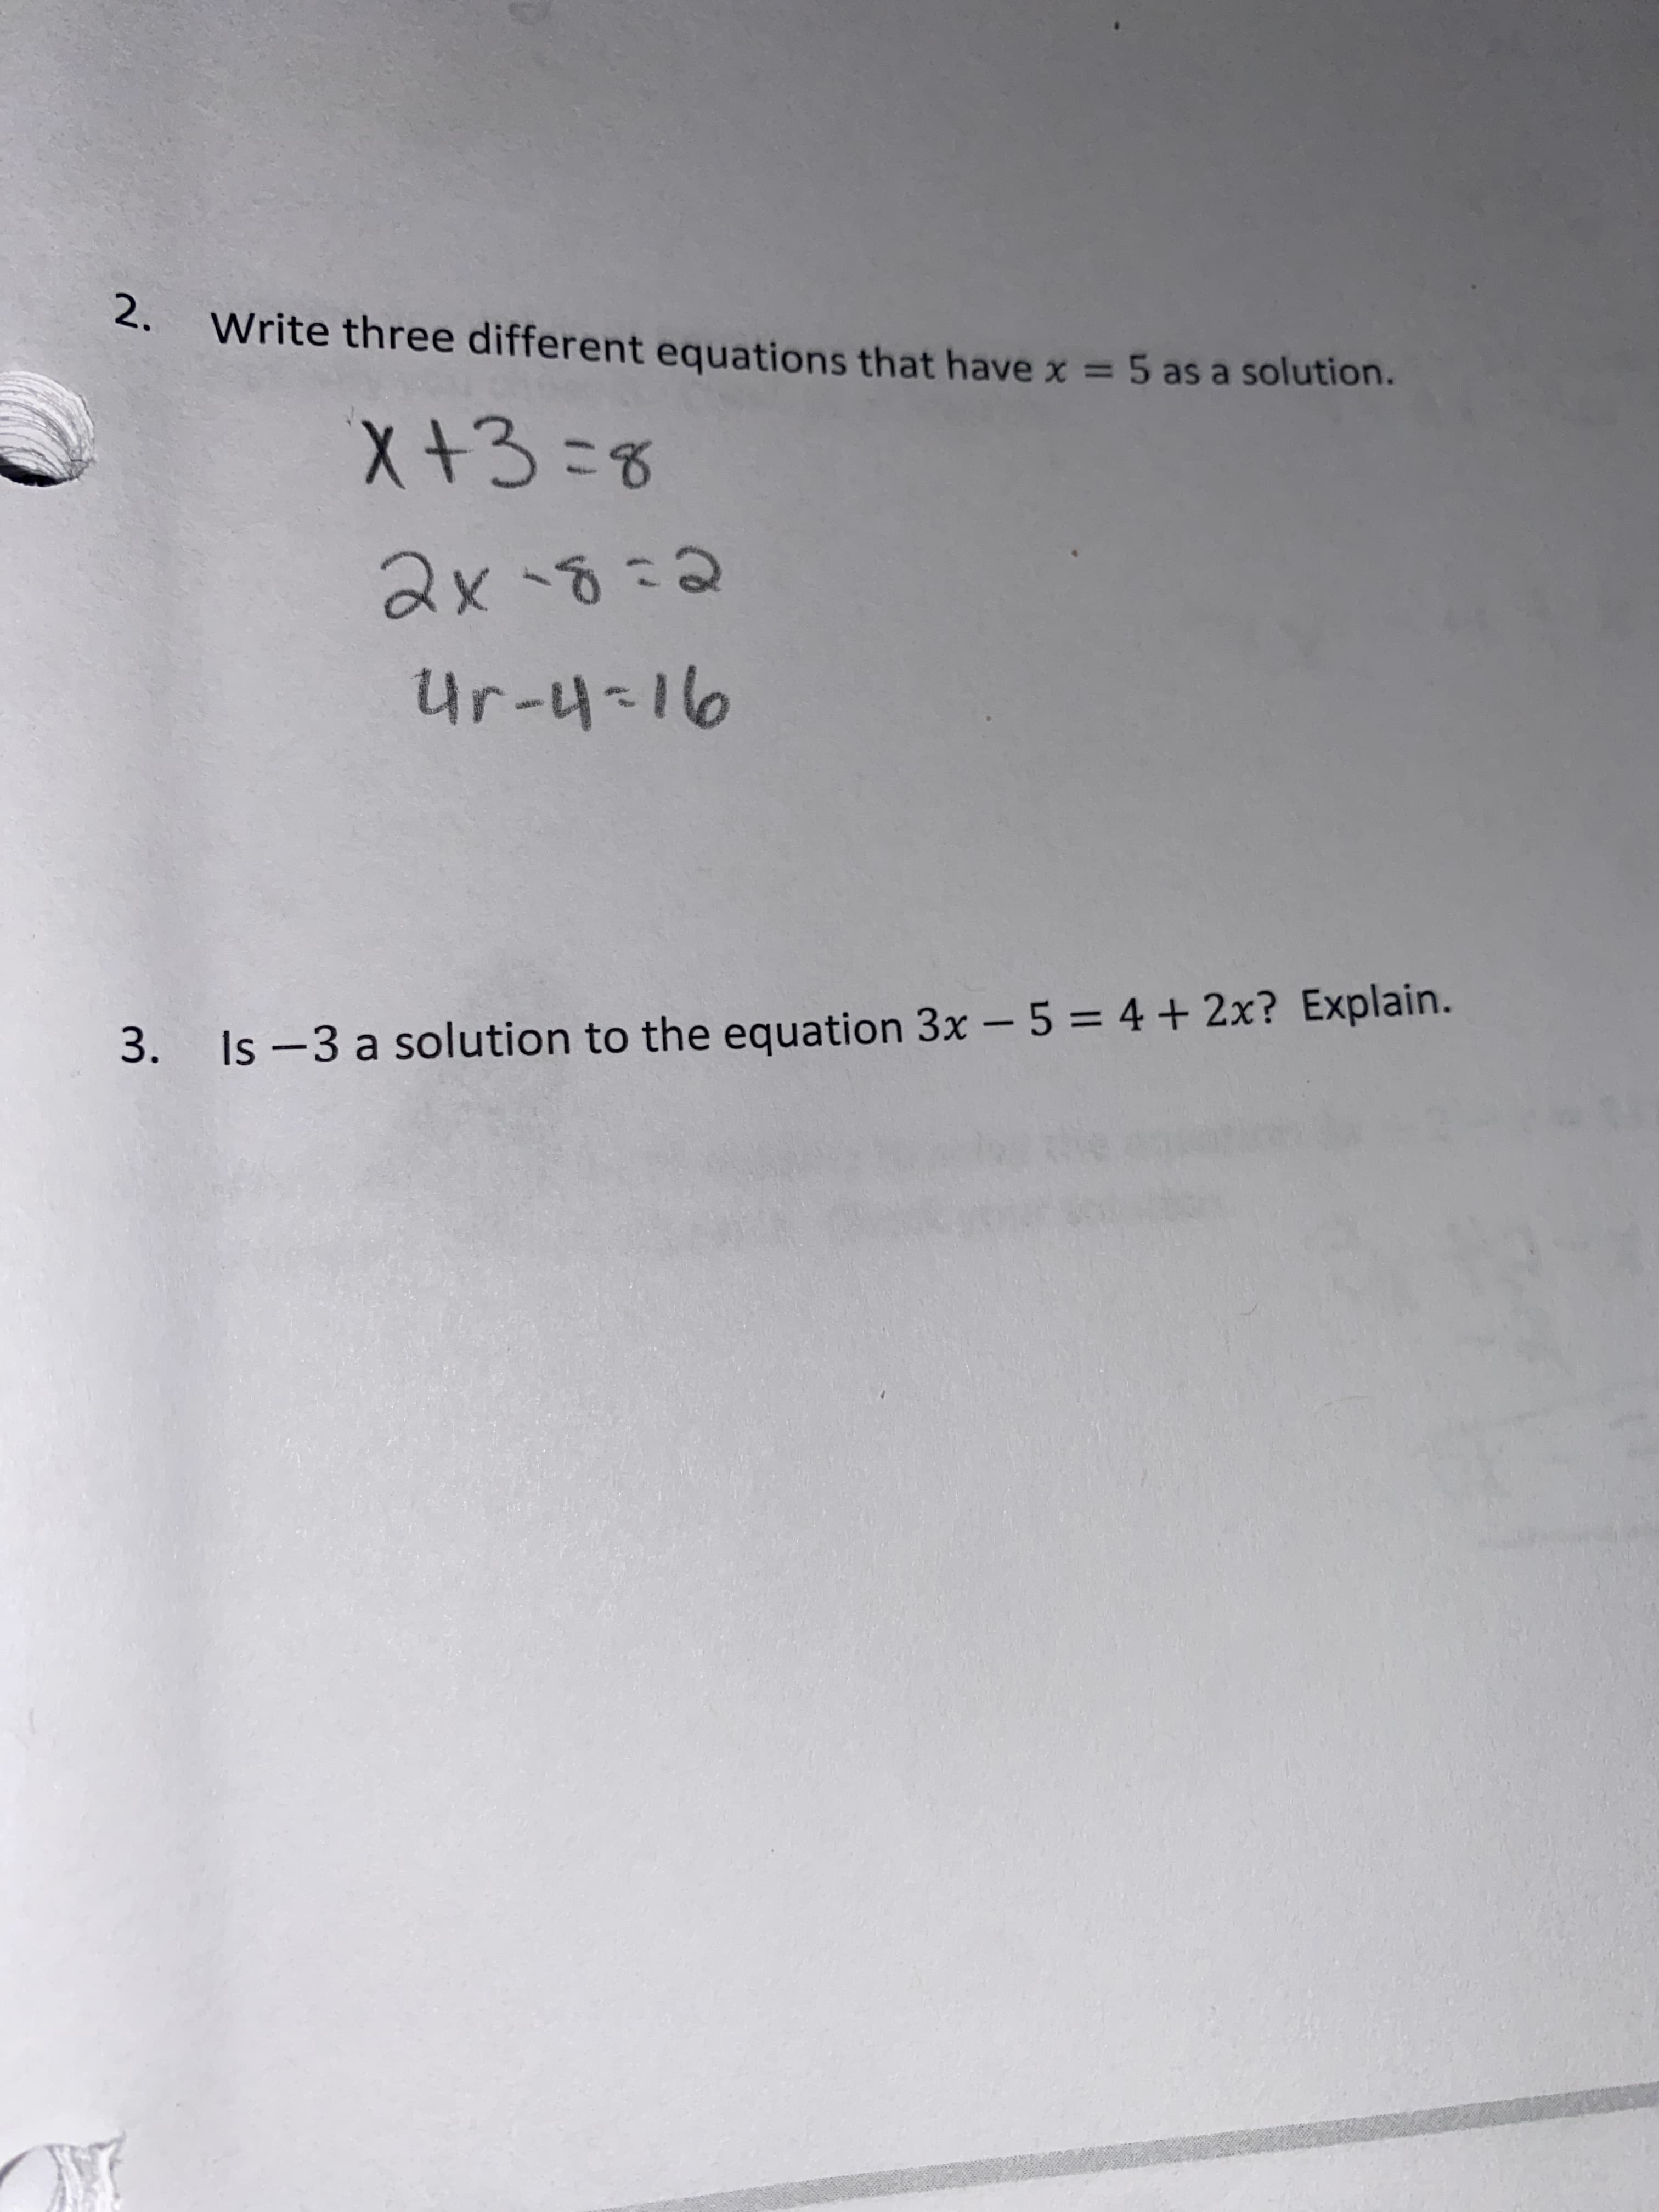 2.
Write three different equations that havex = 5 as a solution.
X+3=8
2x-8=2
Ur-4-16
3. Is -3 a solution to the equation 3x – 5 = 4 + 2x? Explain.
